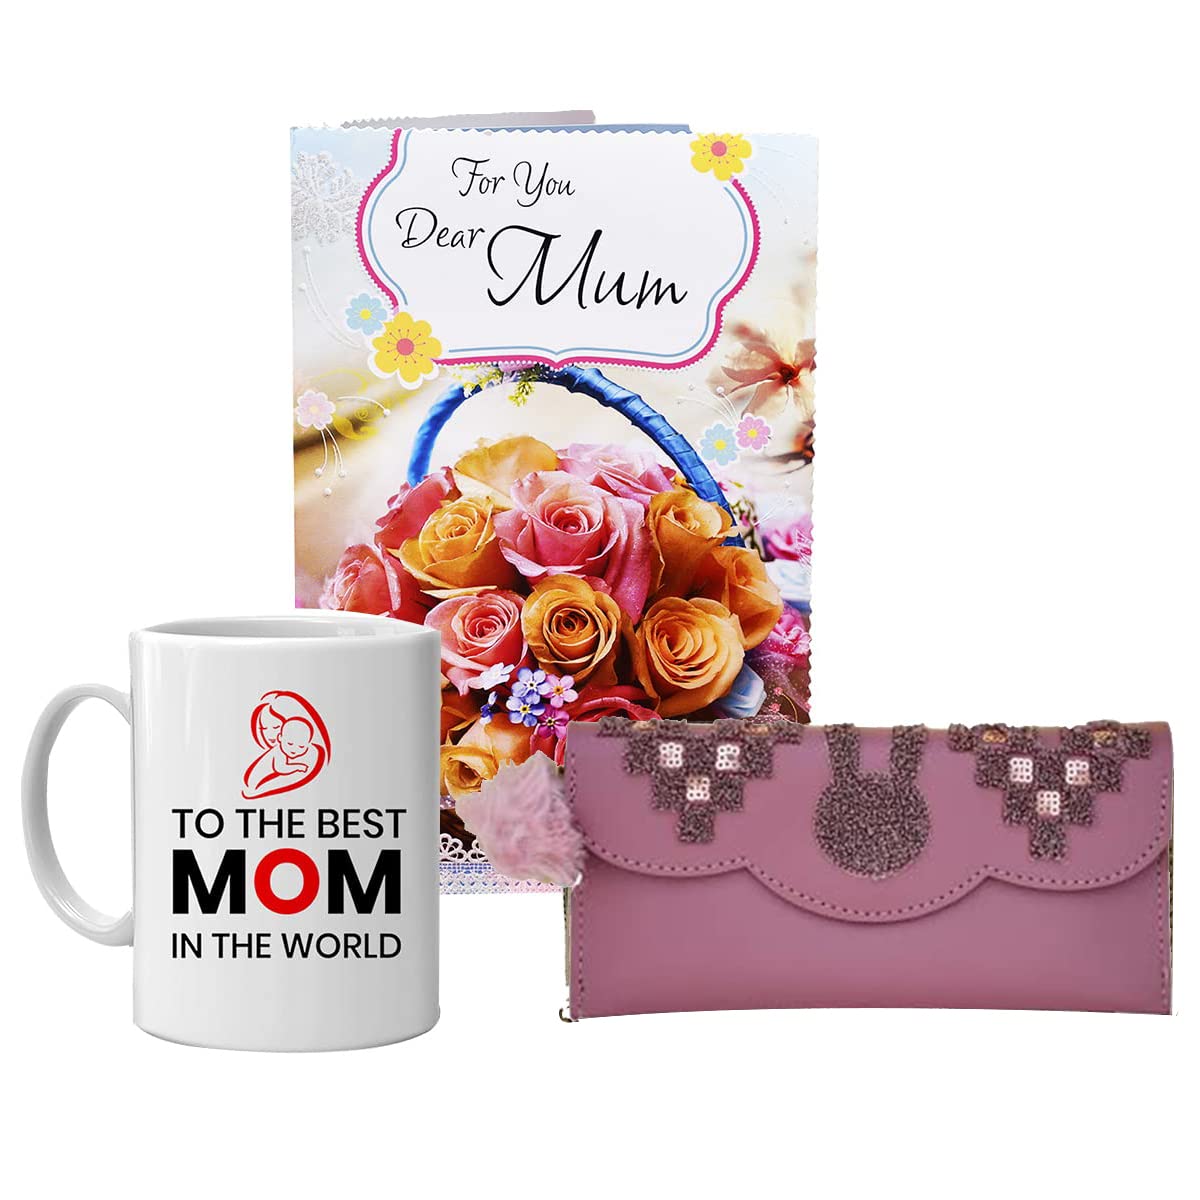 Birthday Gifts Mother Personalized Engraved Photo Plaque Gift For Her at Rs  599.00 | पर्सनलाइज़्ड फोटो गिफ्ट, पर्सनलाइज्ड फोटो गिफ्ट, पर्सनलाइज्ड फोटो  का उपहार - Zest Pics, Hyderabad | ID ...